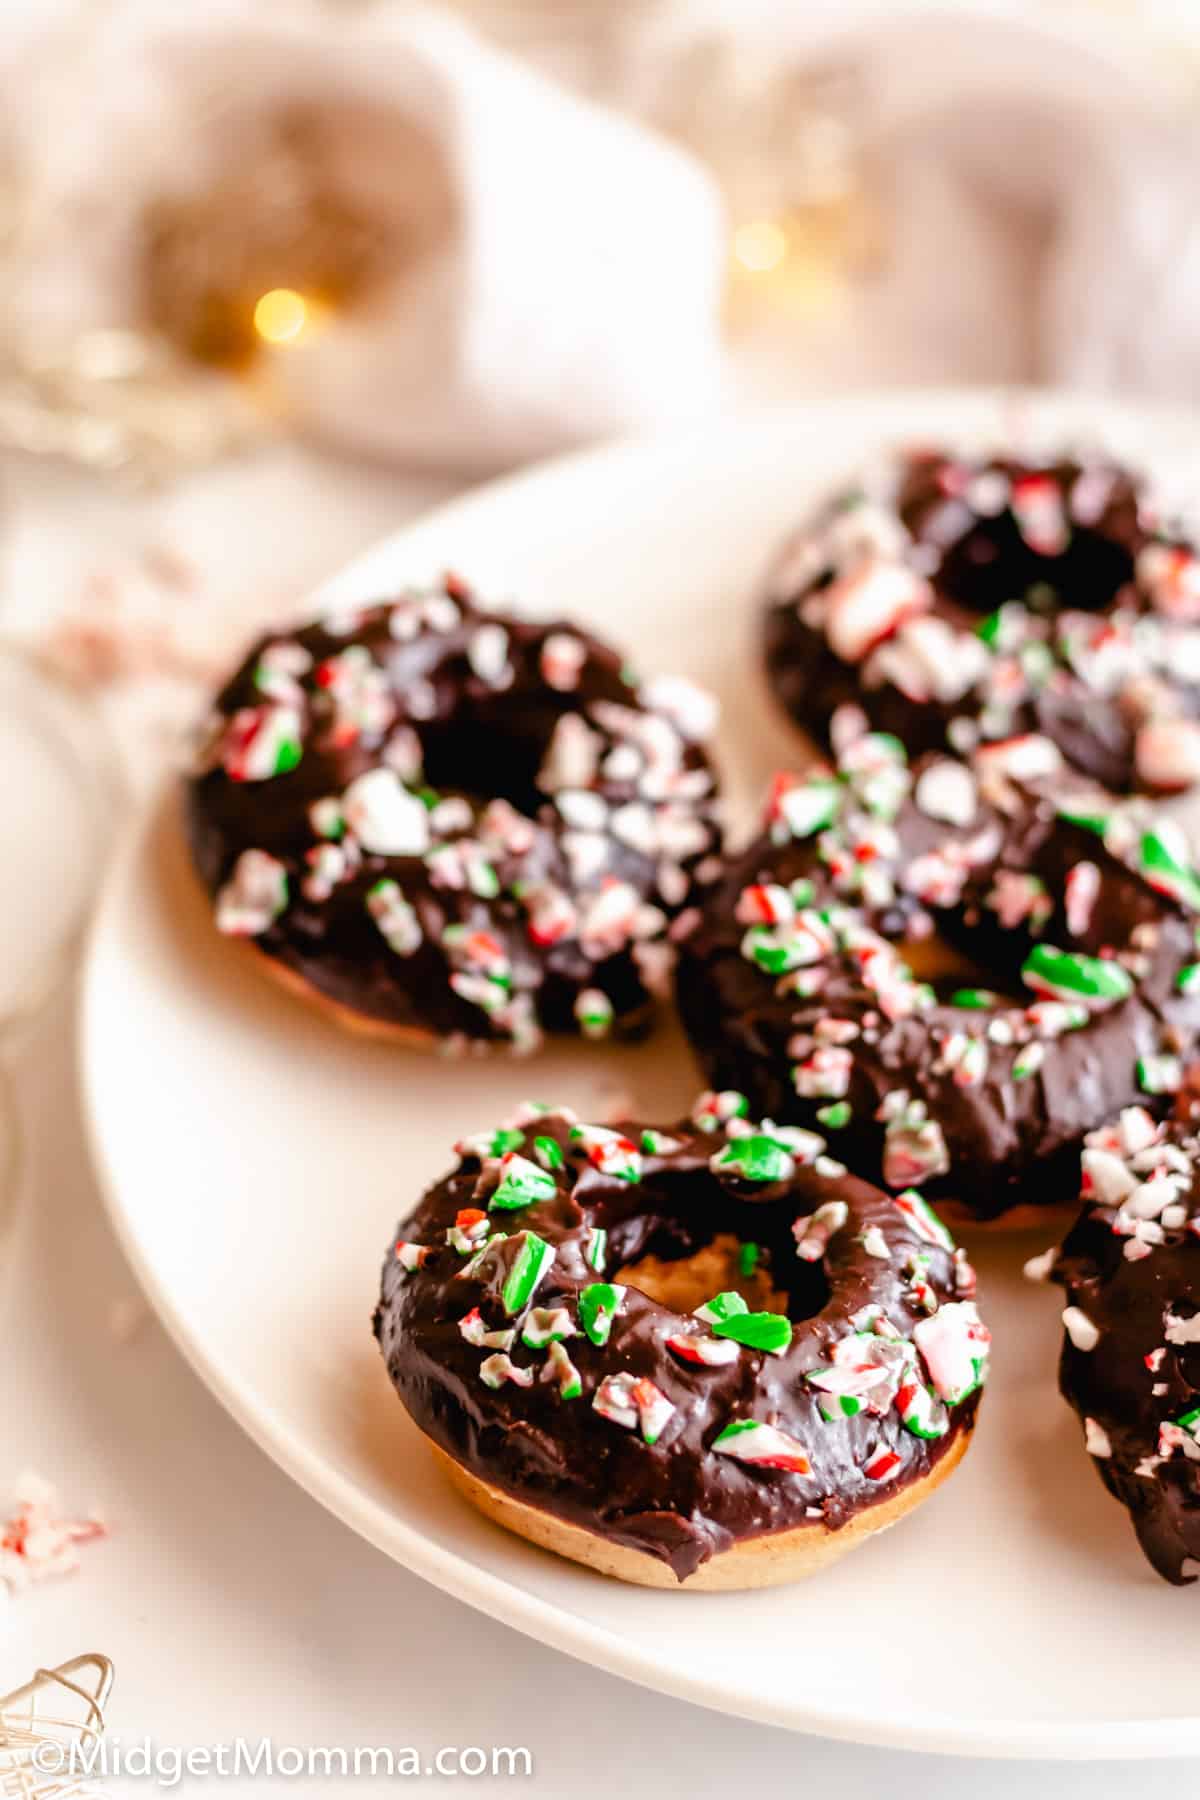  Chocolate Frosted Baked Cake Donuts